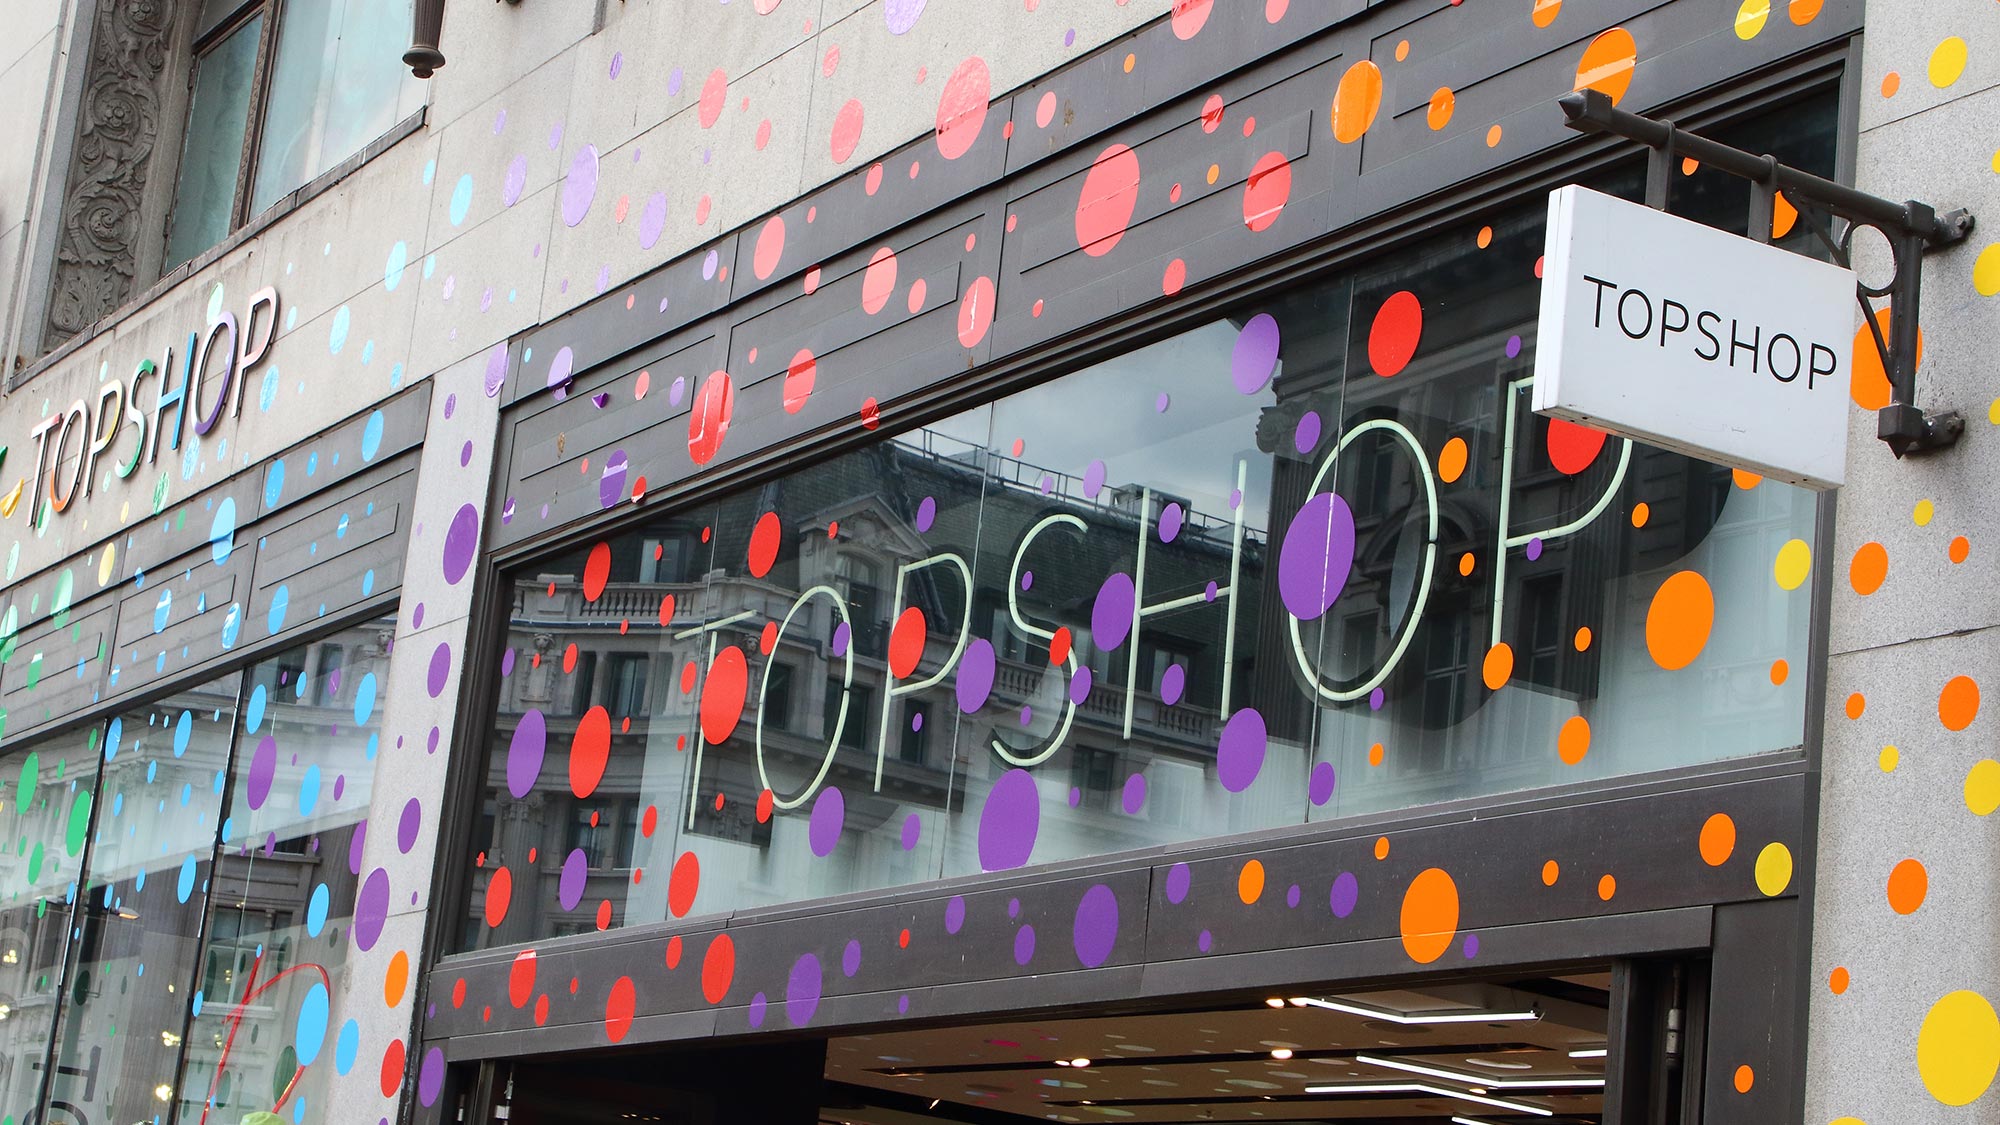 Goodbye Topshop, thanks for the memories